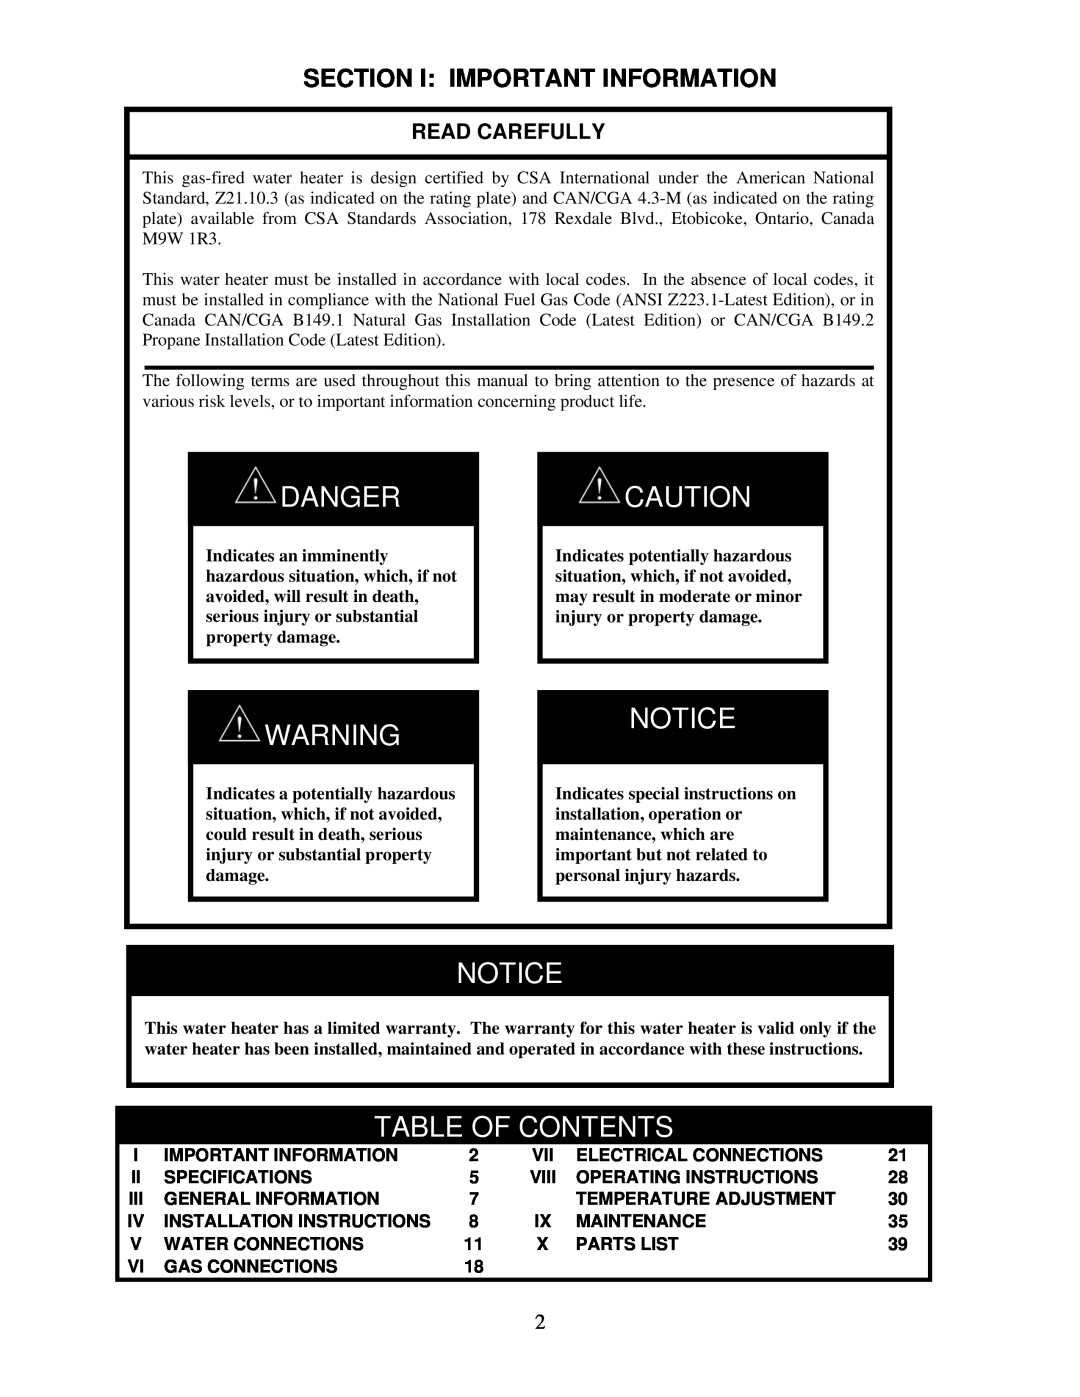 Bradford-White Corp IGE-199R Series Danger, Table Of Contents, Section I Important Information, Read Carefully, Parts List 